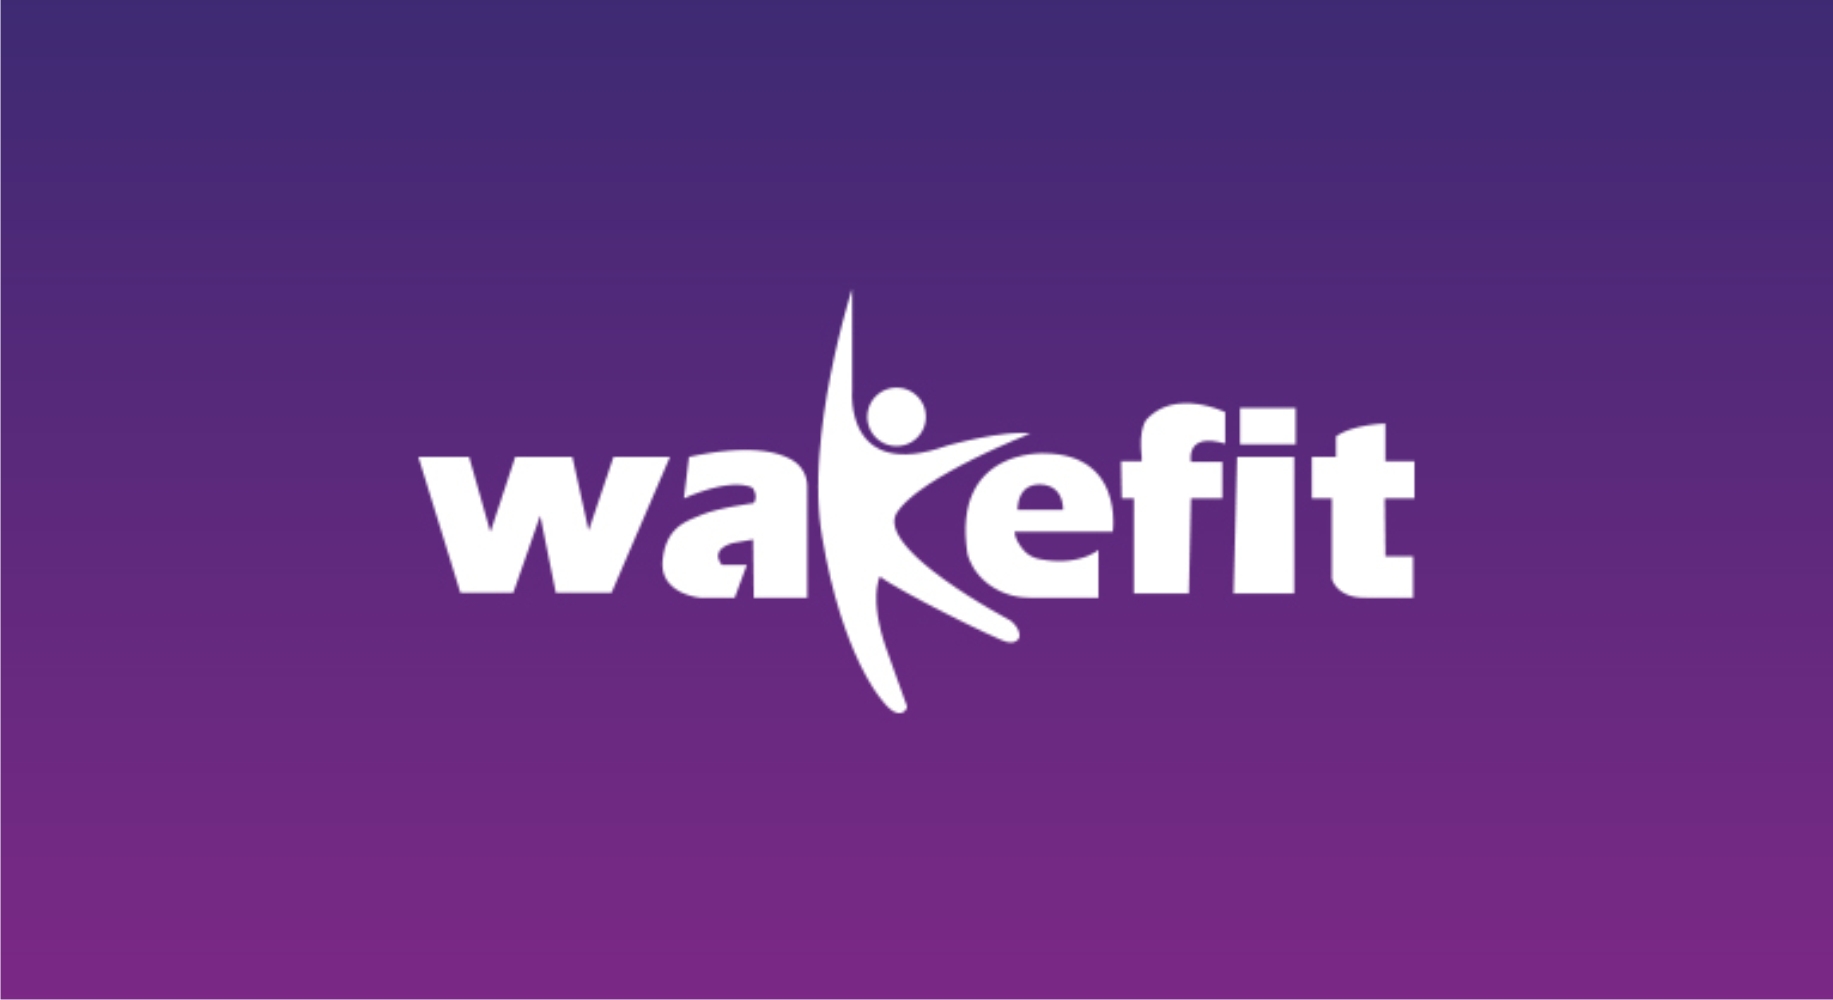 Wakefit.co announces wellness leave policy for employees - Business Manager